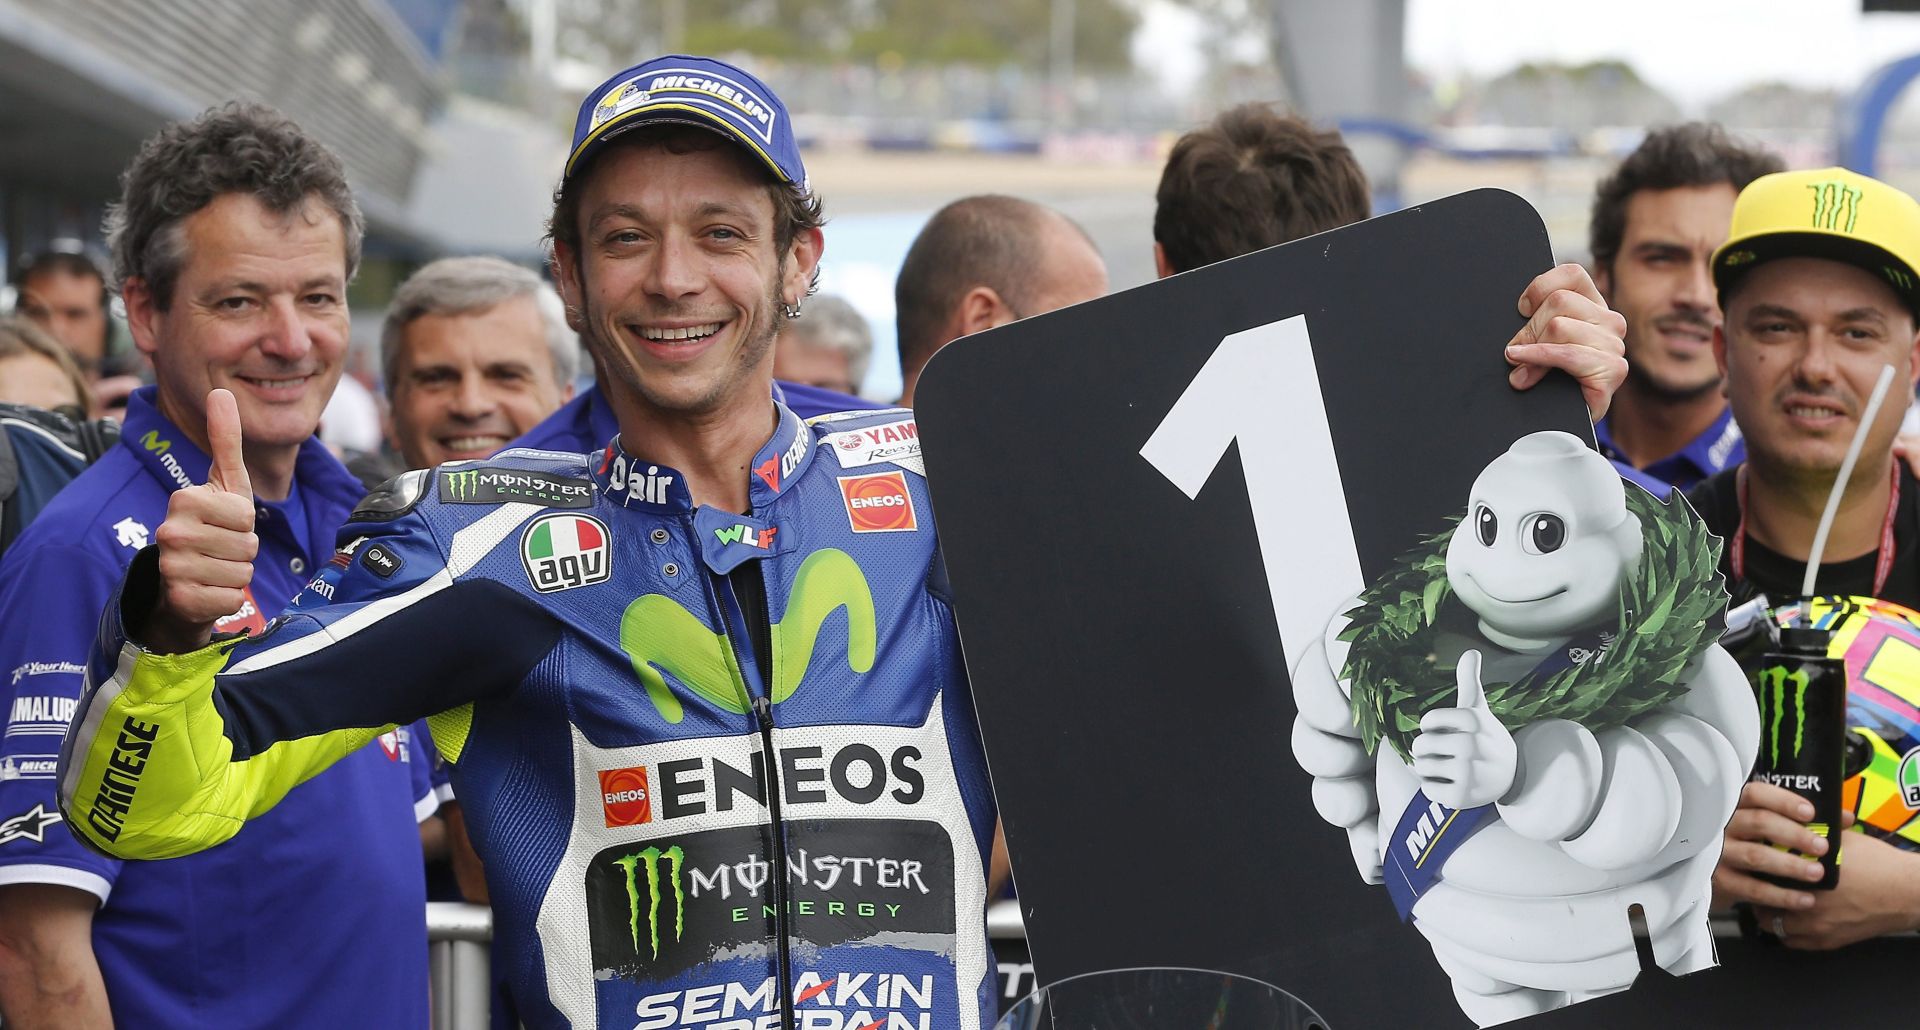 epa05273530 Italian MotoGP rider Valentino Rossi (C), of Movistar Yamaha, celebrates his pole position in the Moto3 qualifying session for the Spanish Motorcycle Grand Prix at the Circuit of Jerez, southern Spain, 23 April 2016. The Motorcycling Grand Prix of Spain will take place in Jerez on 24 April 2016.  EPA/Jose Manuel Vidal